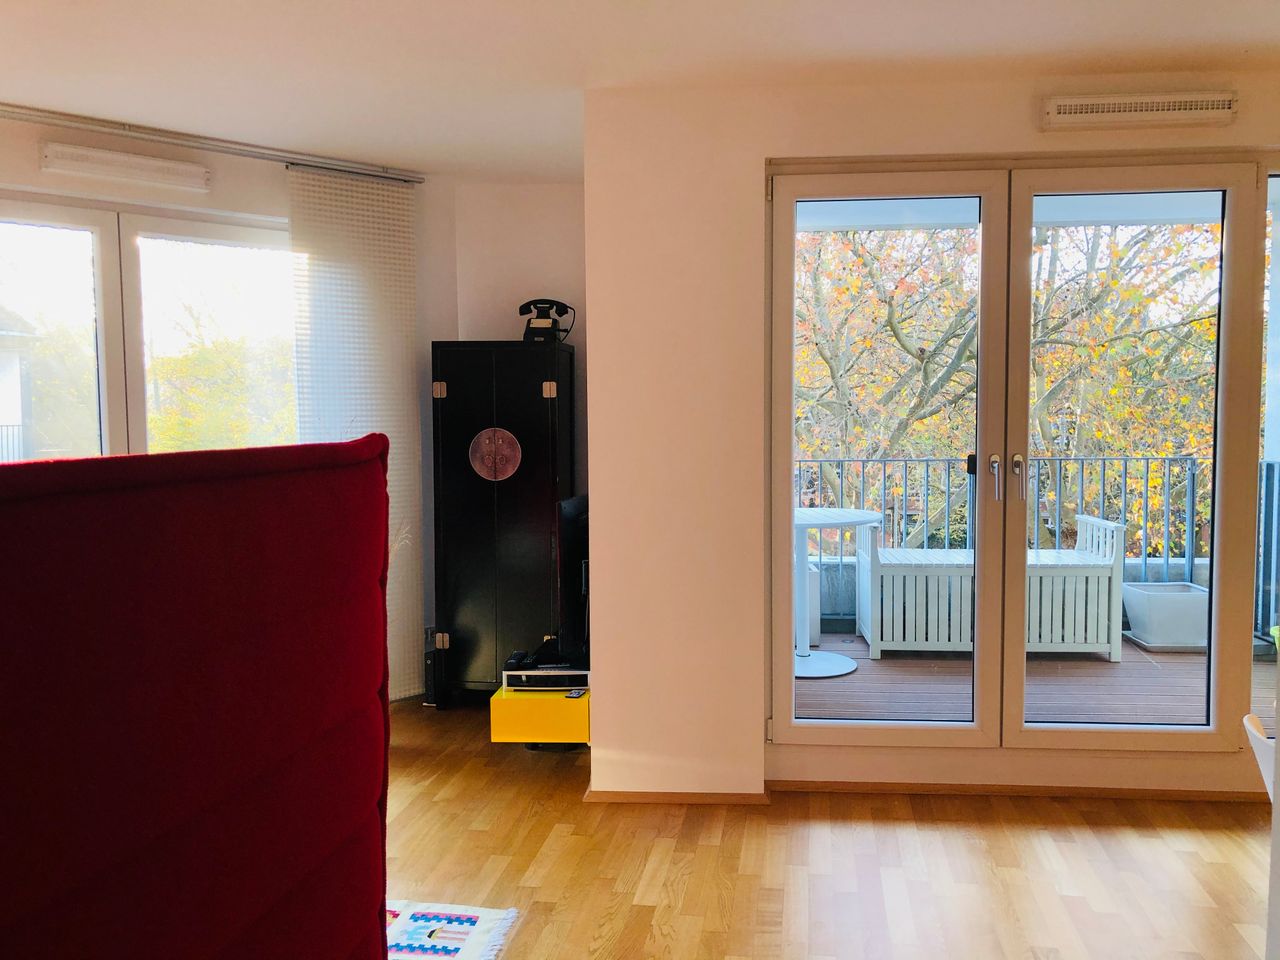 Modern, bright and comfortable flat with balcony in the heart of Cologne city- Mauritius quarter